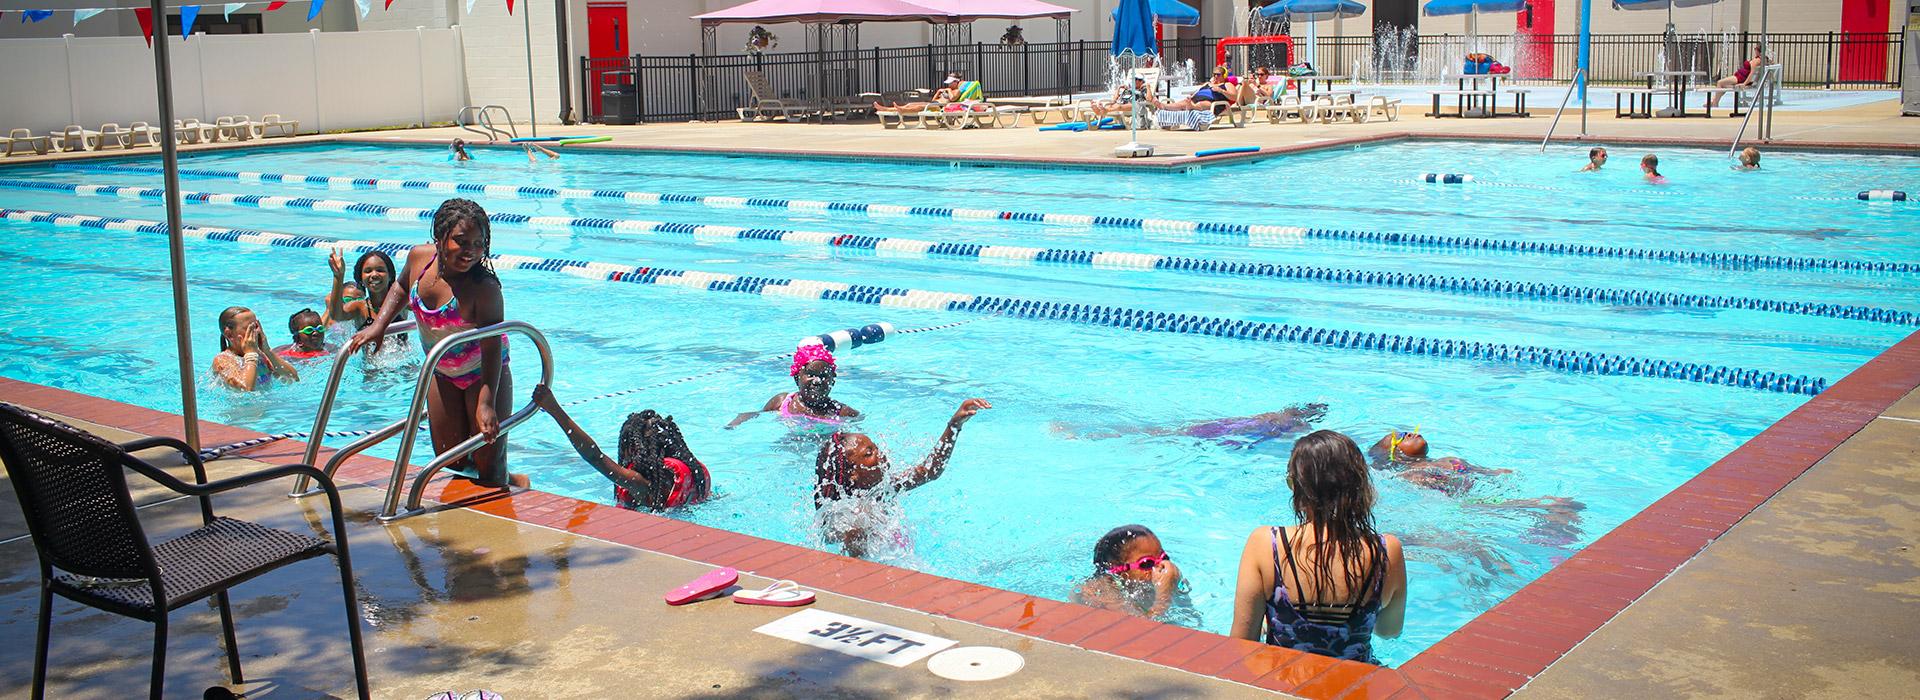 Greenbrier Family YMCA swimming